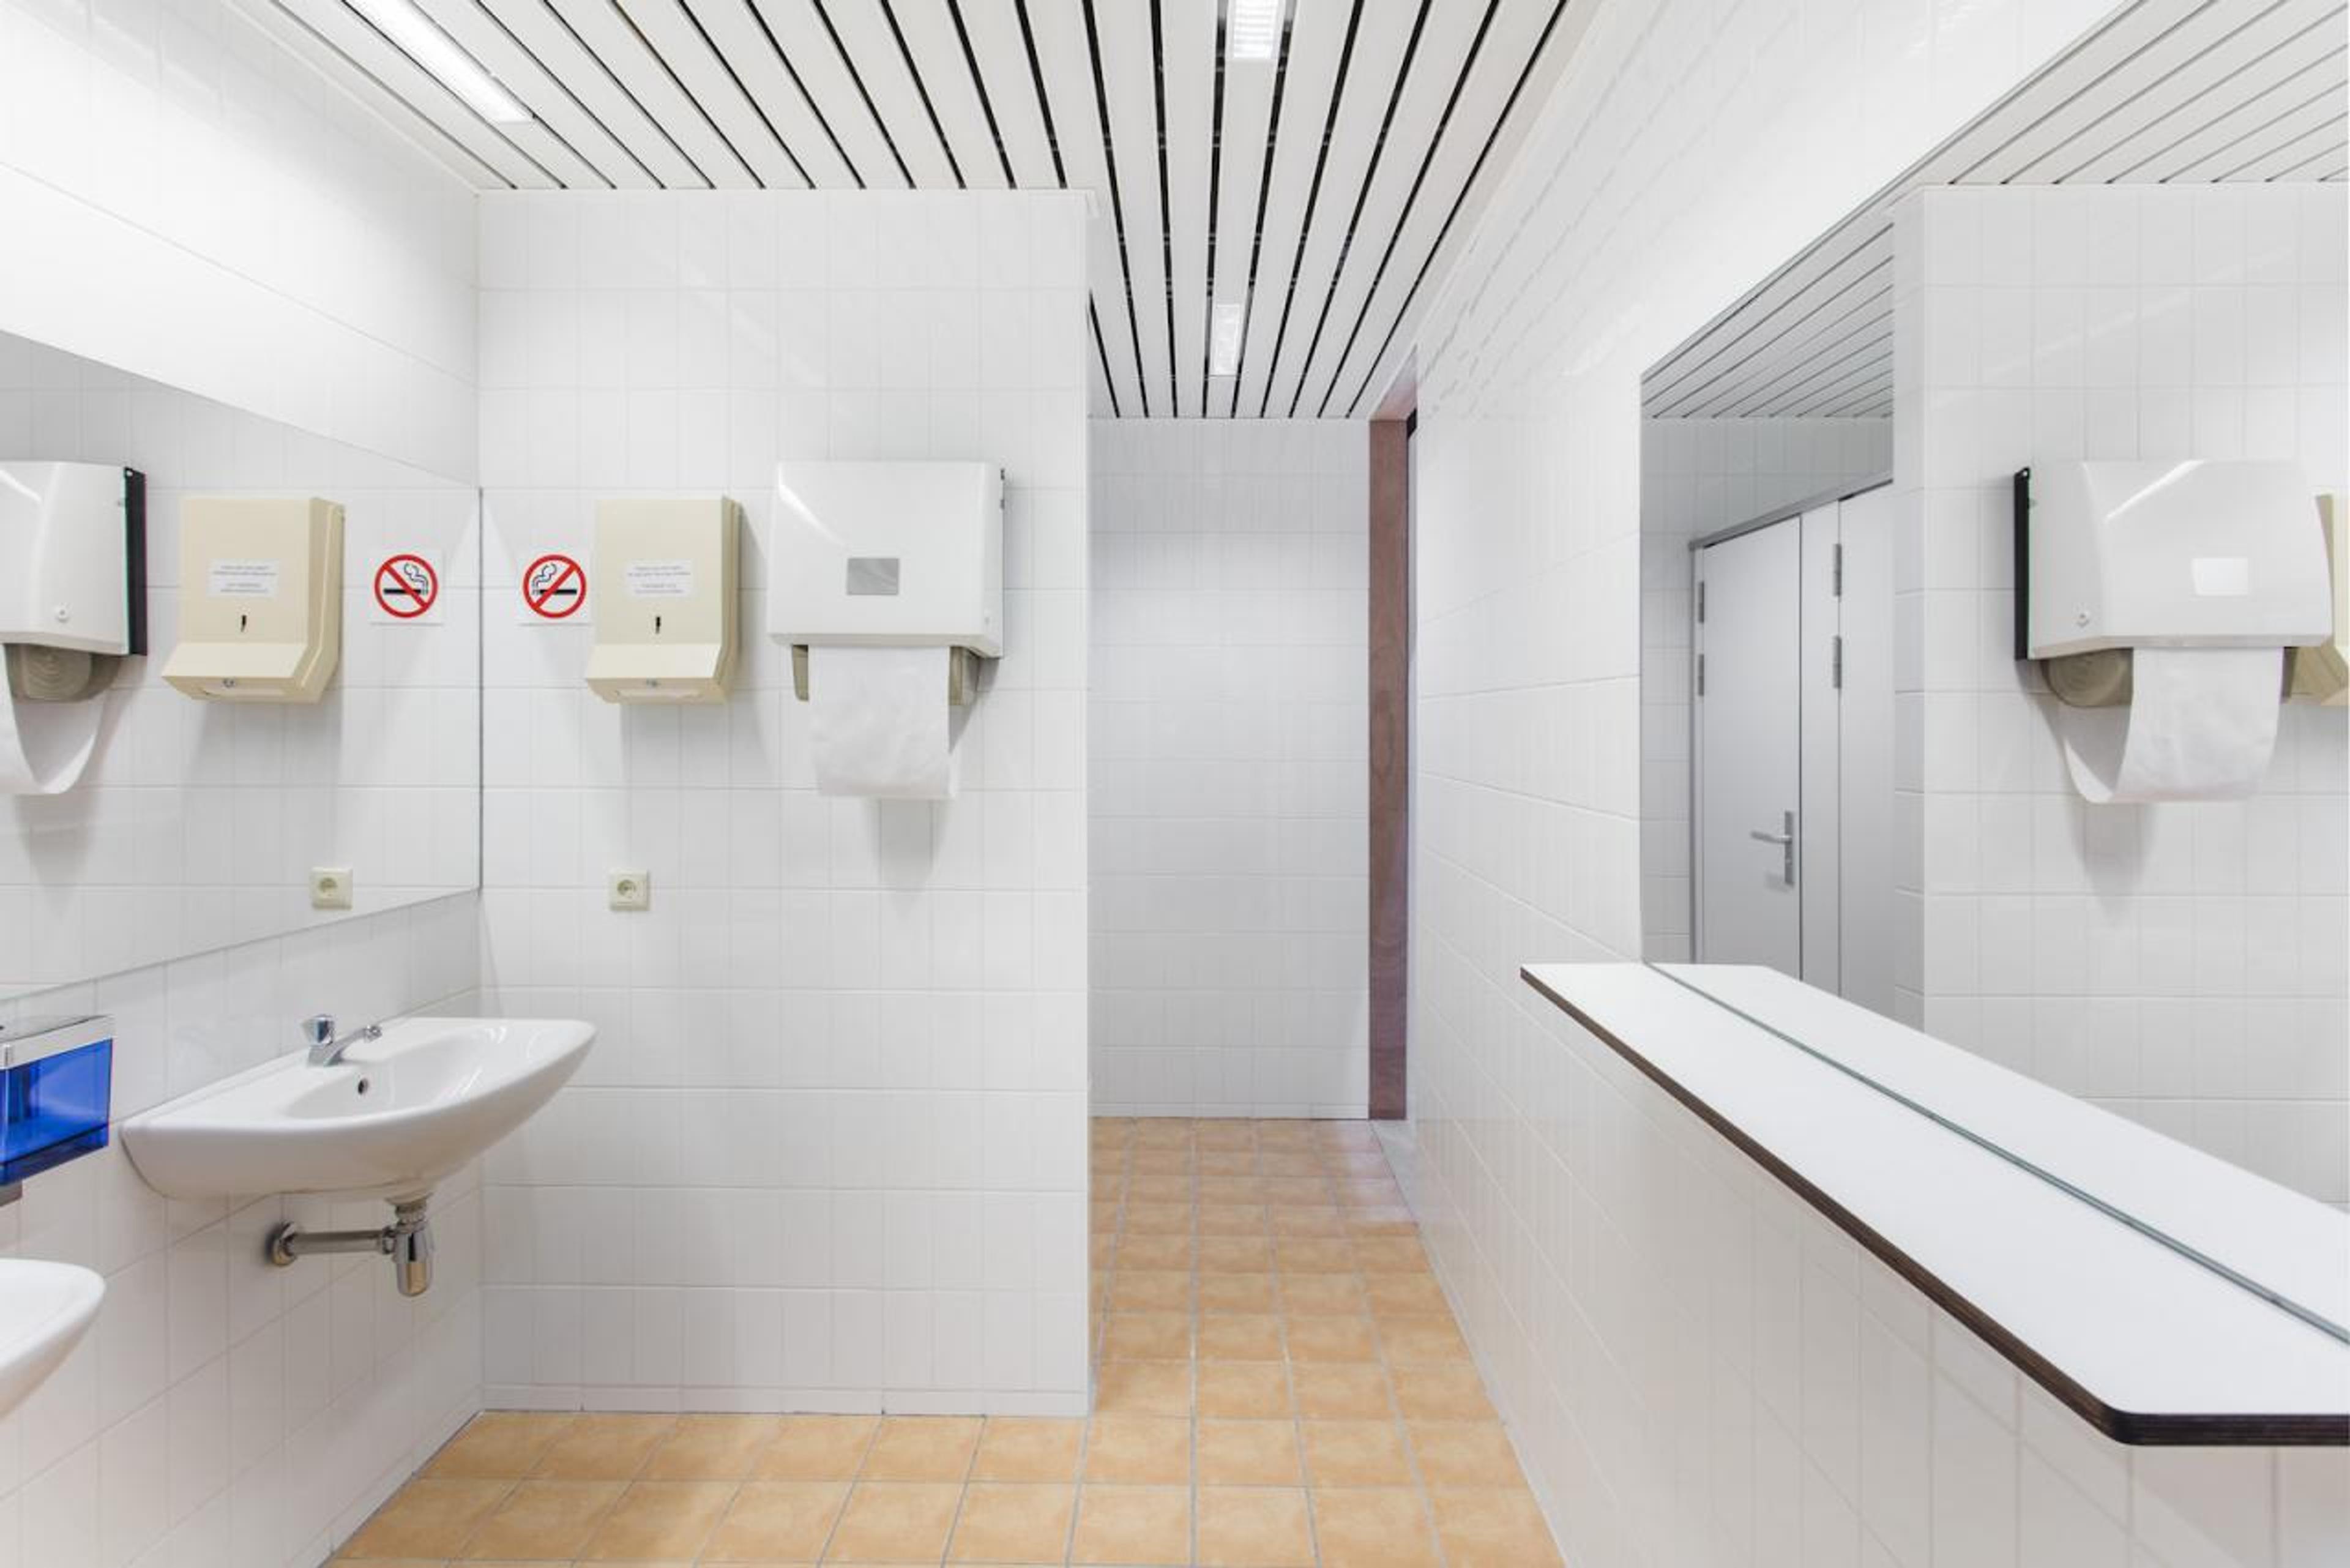 Superflex Power Toilets/Council of the European Union  (2018) Power Toilets / Council of the European Union is designed in close collaboration with NEZU AYMO architects; Courtesy of the artist